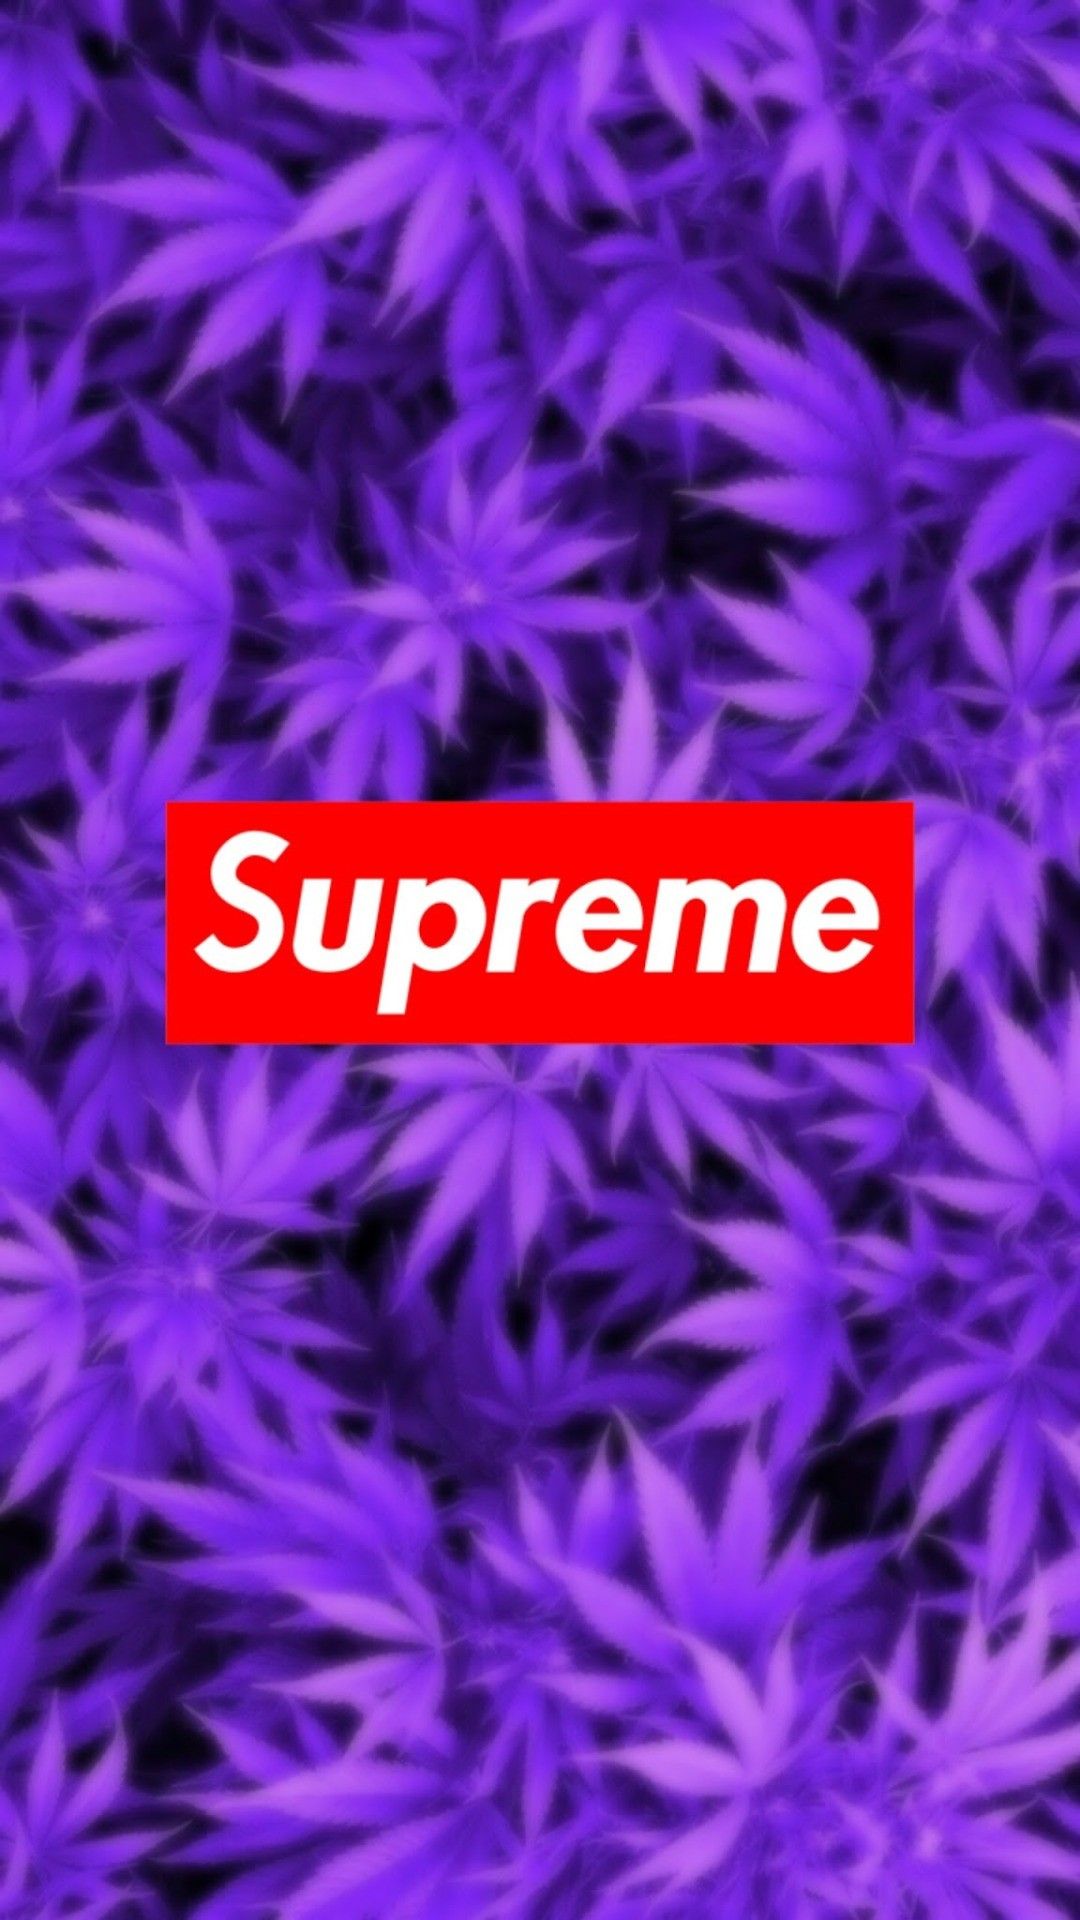 Weed Supreme Wallpaper For iPhone Wallpaper iPhone HD Wallpaper